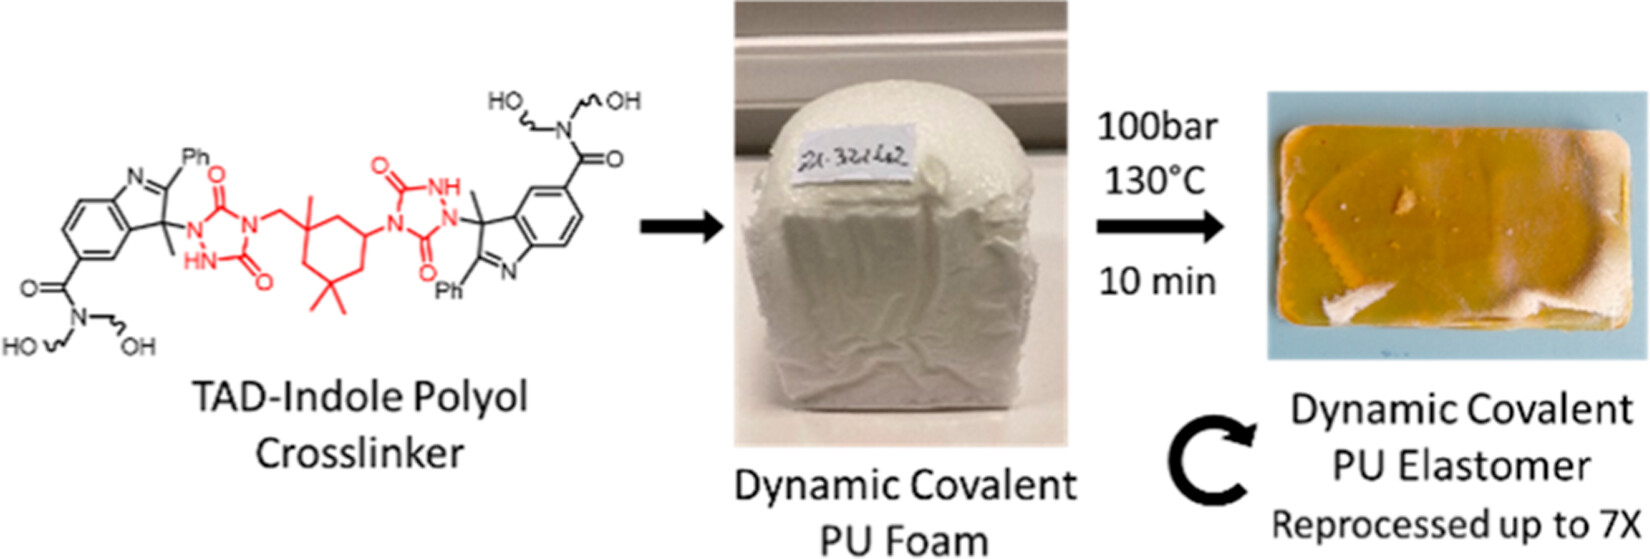 Foam-to-Elastomer Recycling of Polyurethane Materials through Incorporation of Dynamic Covalent TAD-Indole Linkages